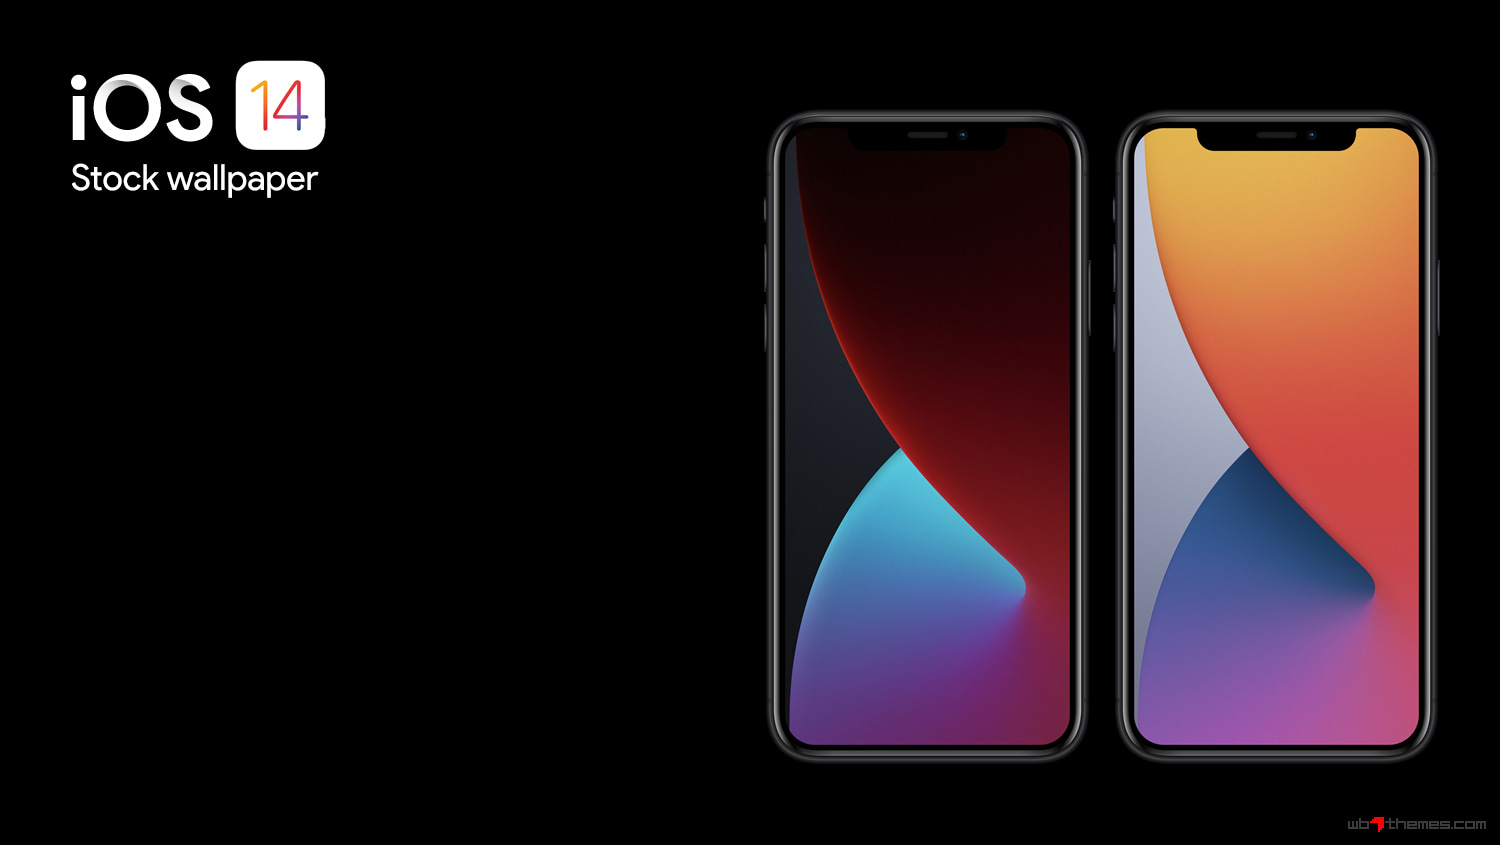 iOS 14 stock wallpapers collection available for download here